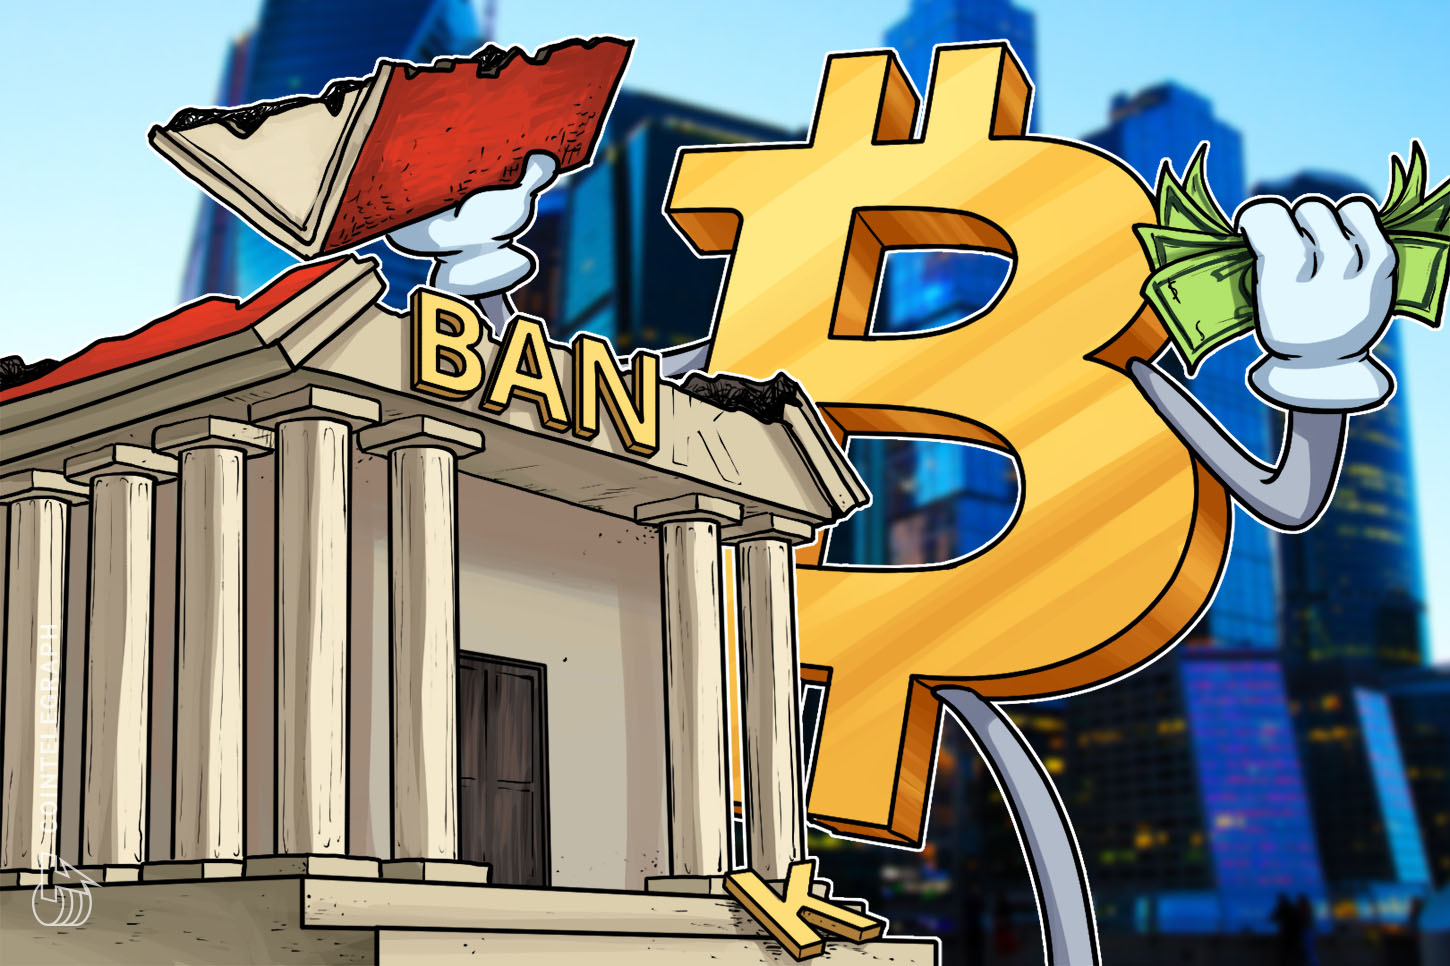 Survey Respondents Are Cut up 50/50 Between Bitcoin & Large Banks